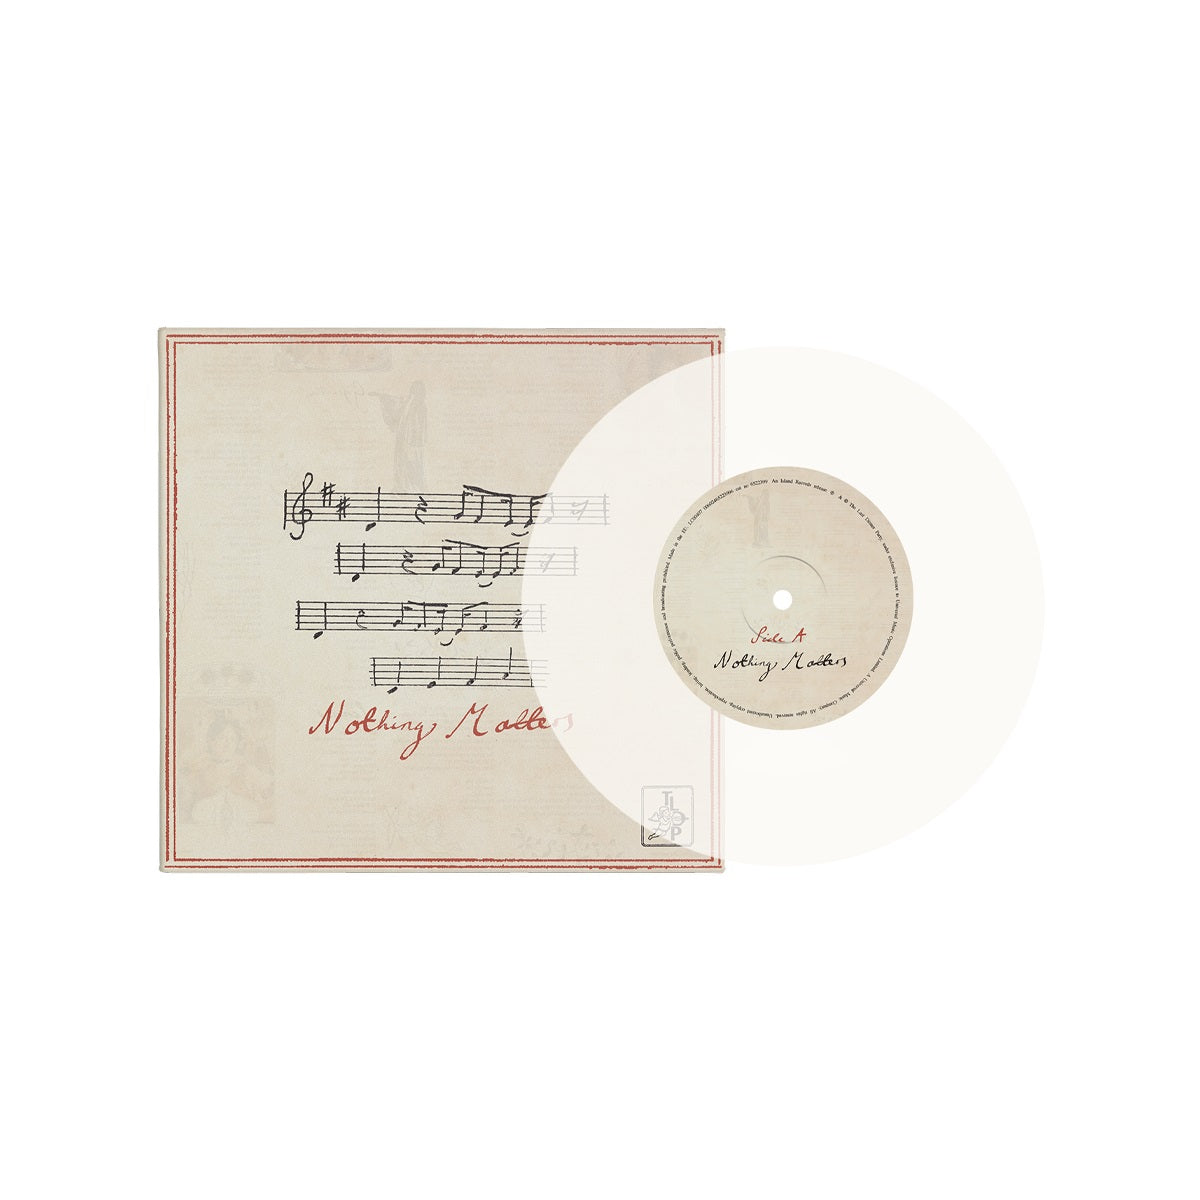 The Last Dinner Party- Nothing Matters [Crystal Clear 7" Single] (PREORDER)